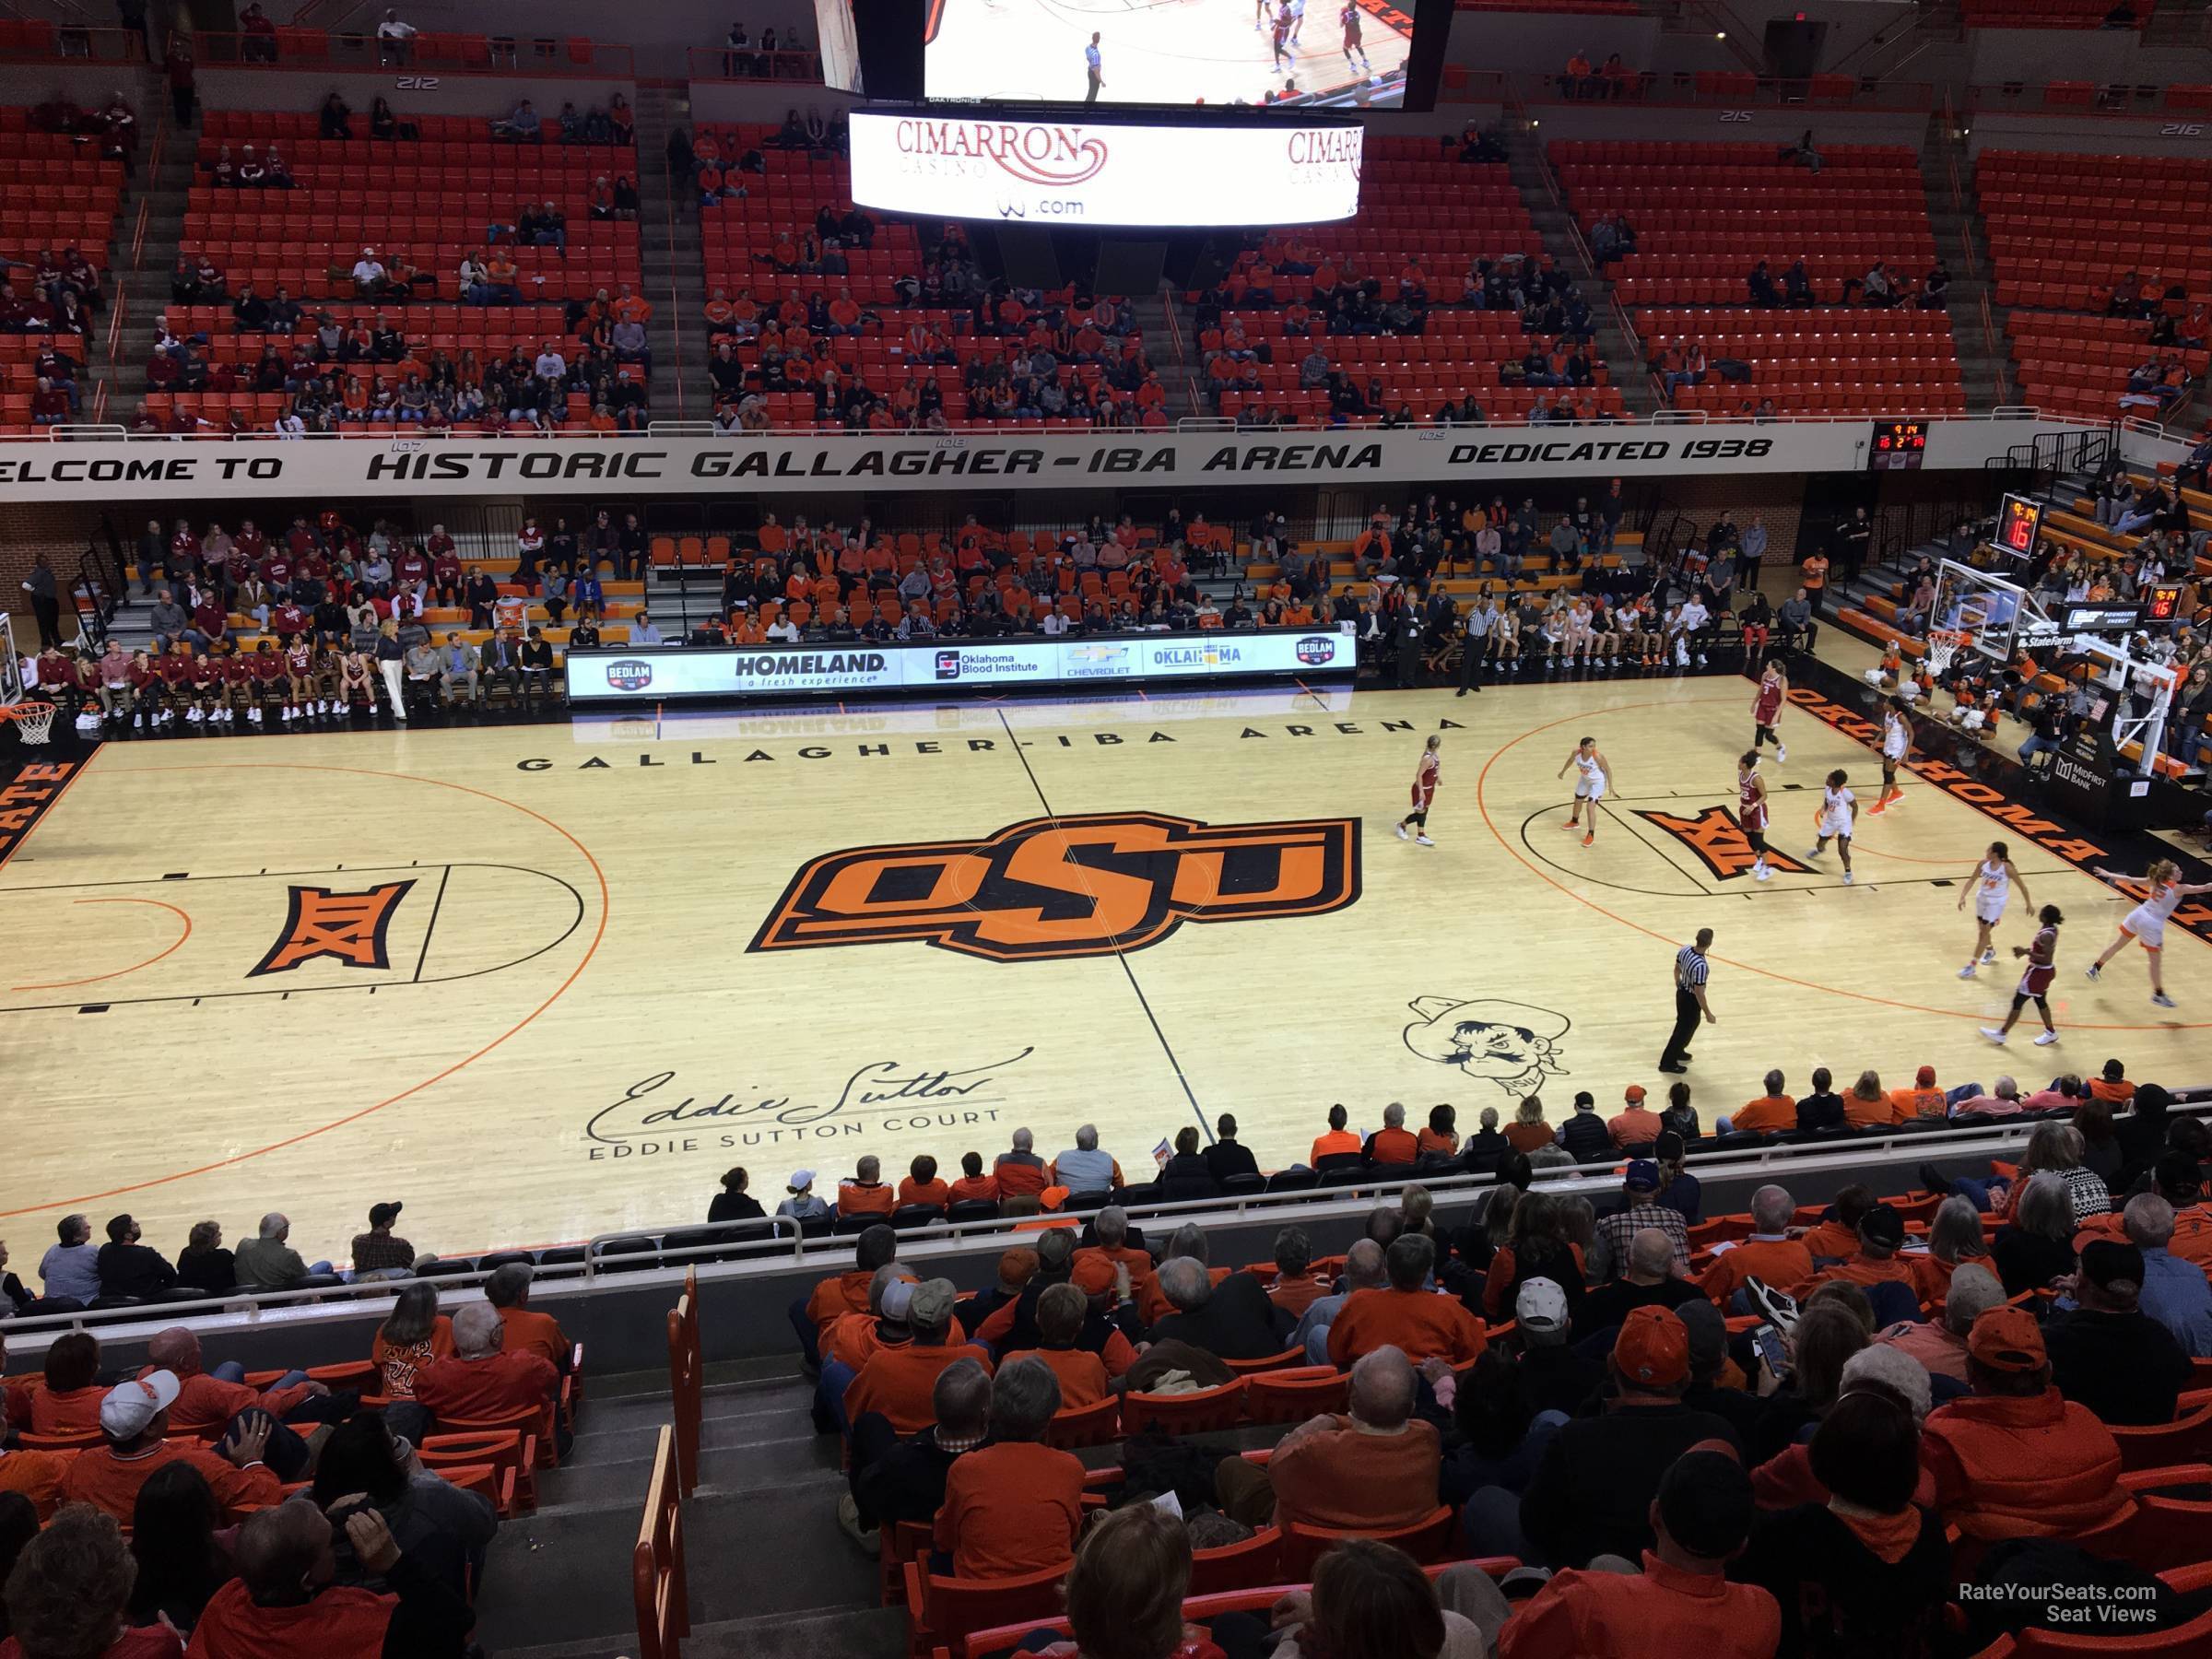 section 203, row 13 seat view  - gallagher-iba arena